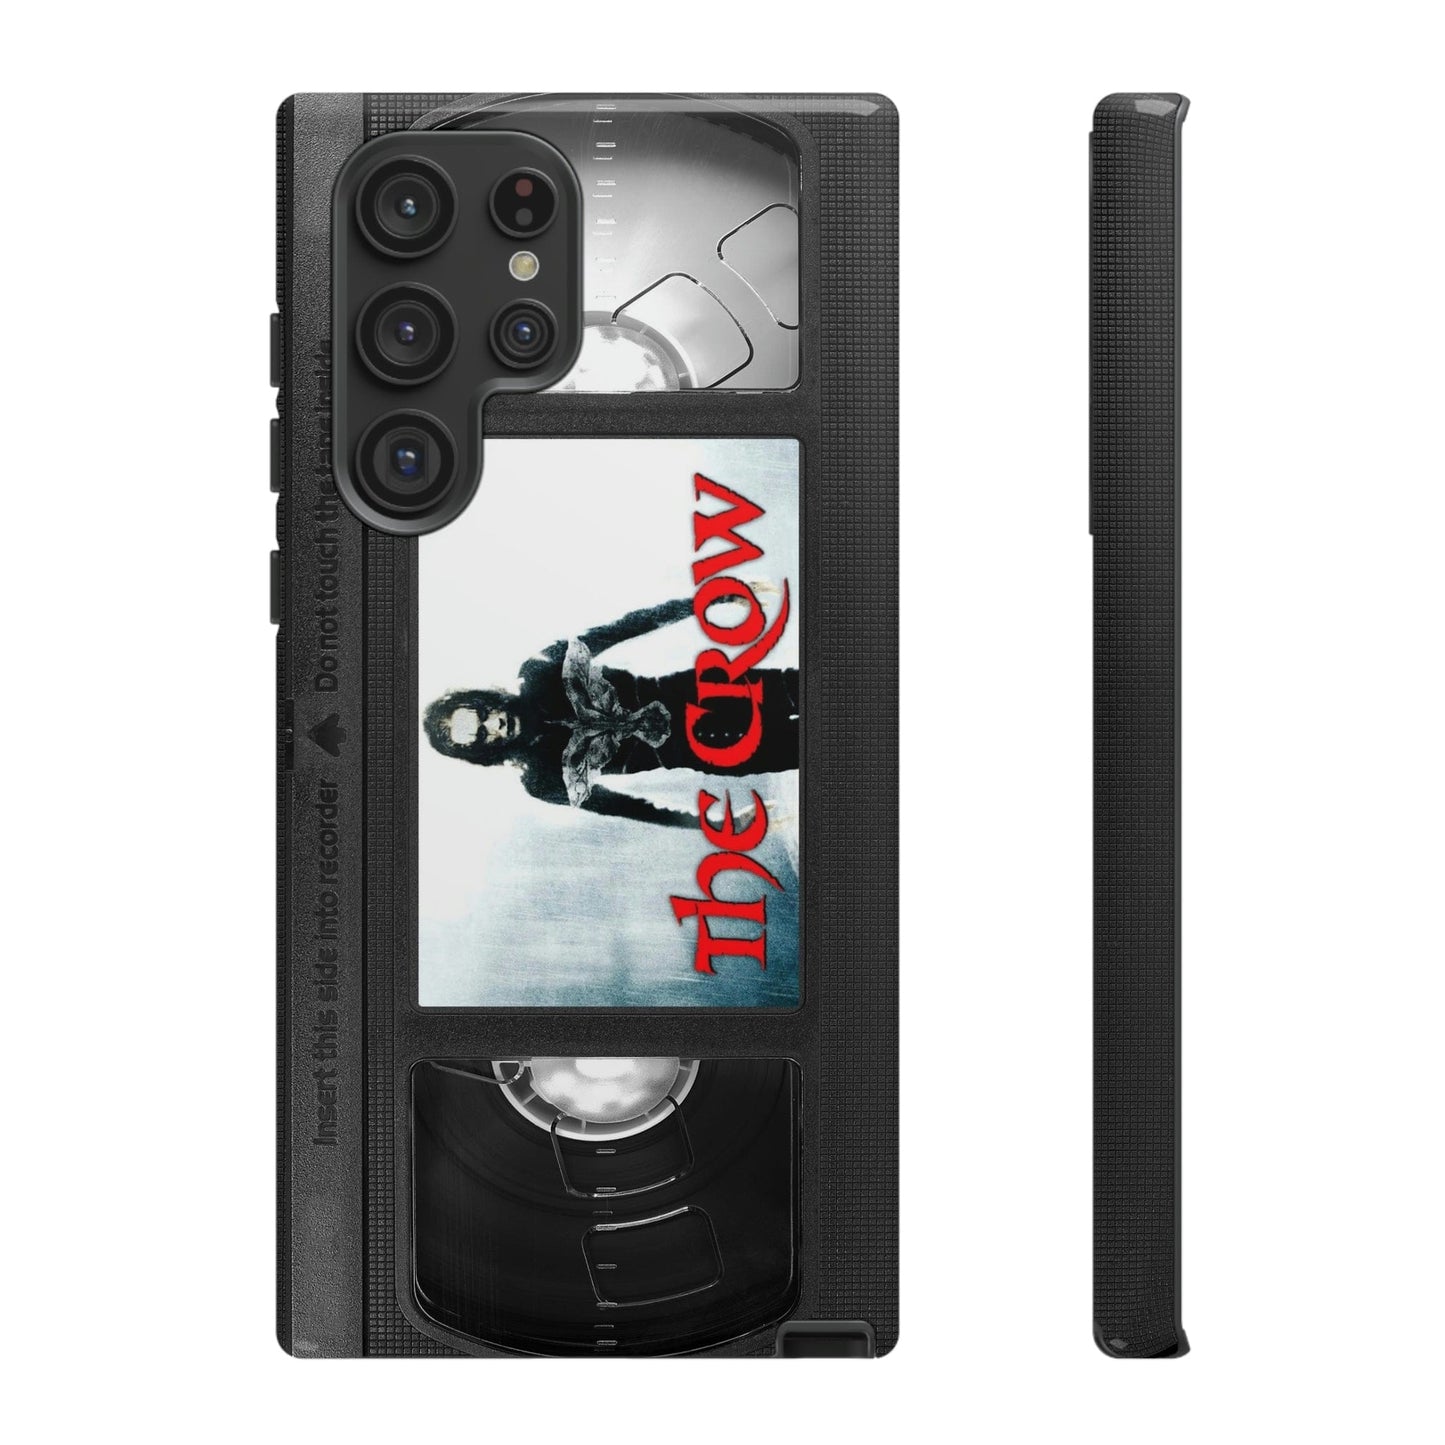 The Crow Impact Resistant VHS Phone Case